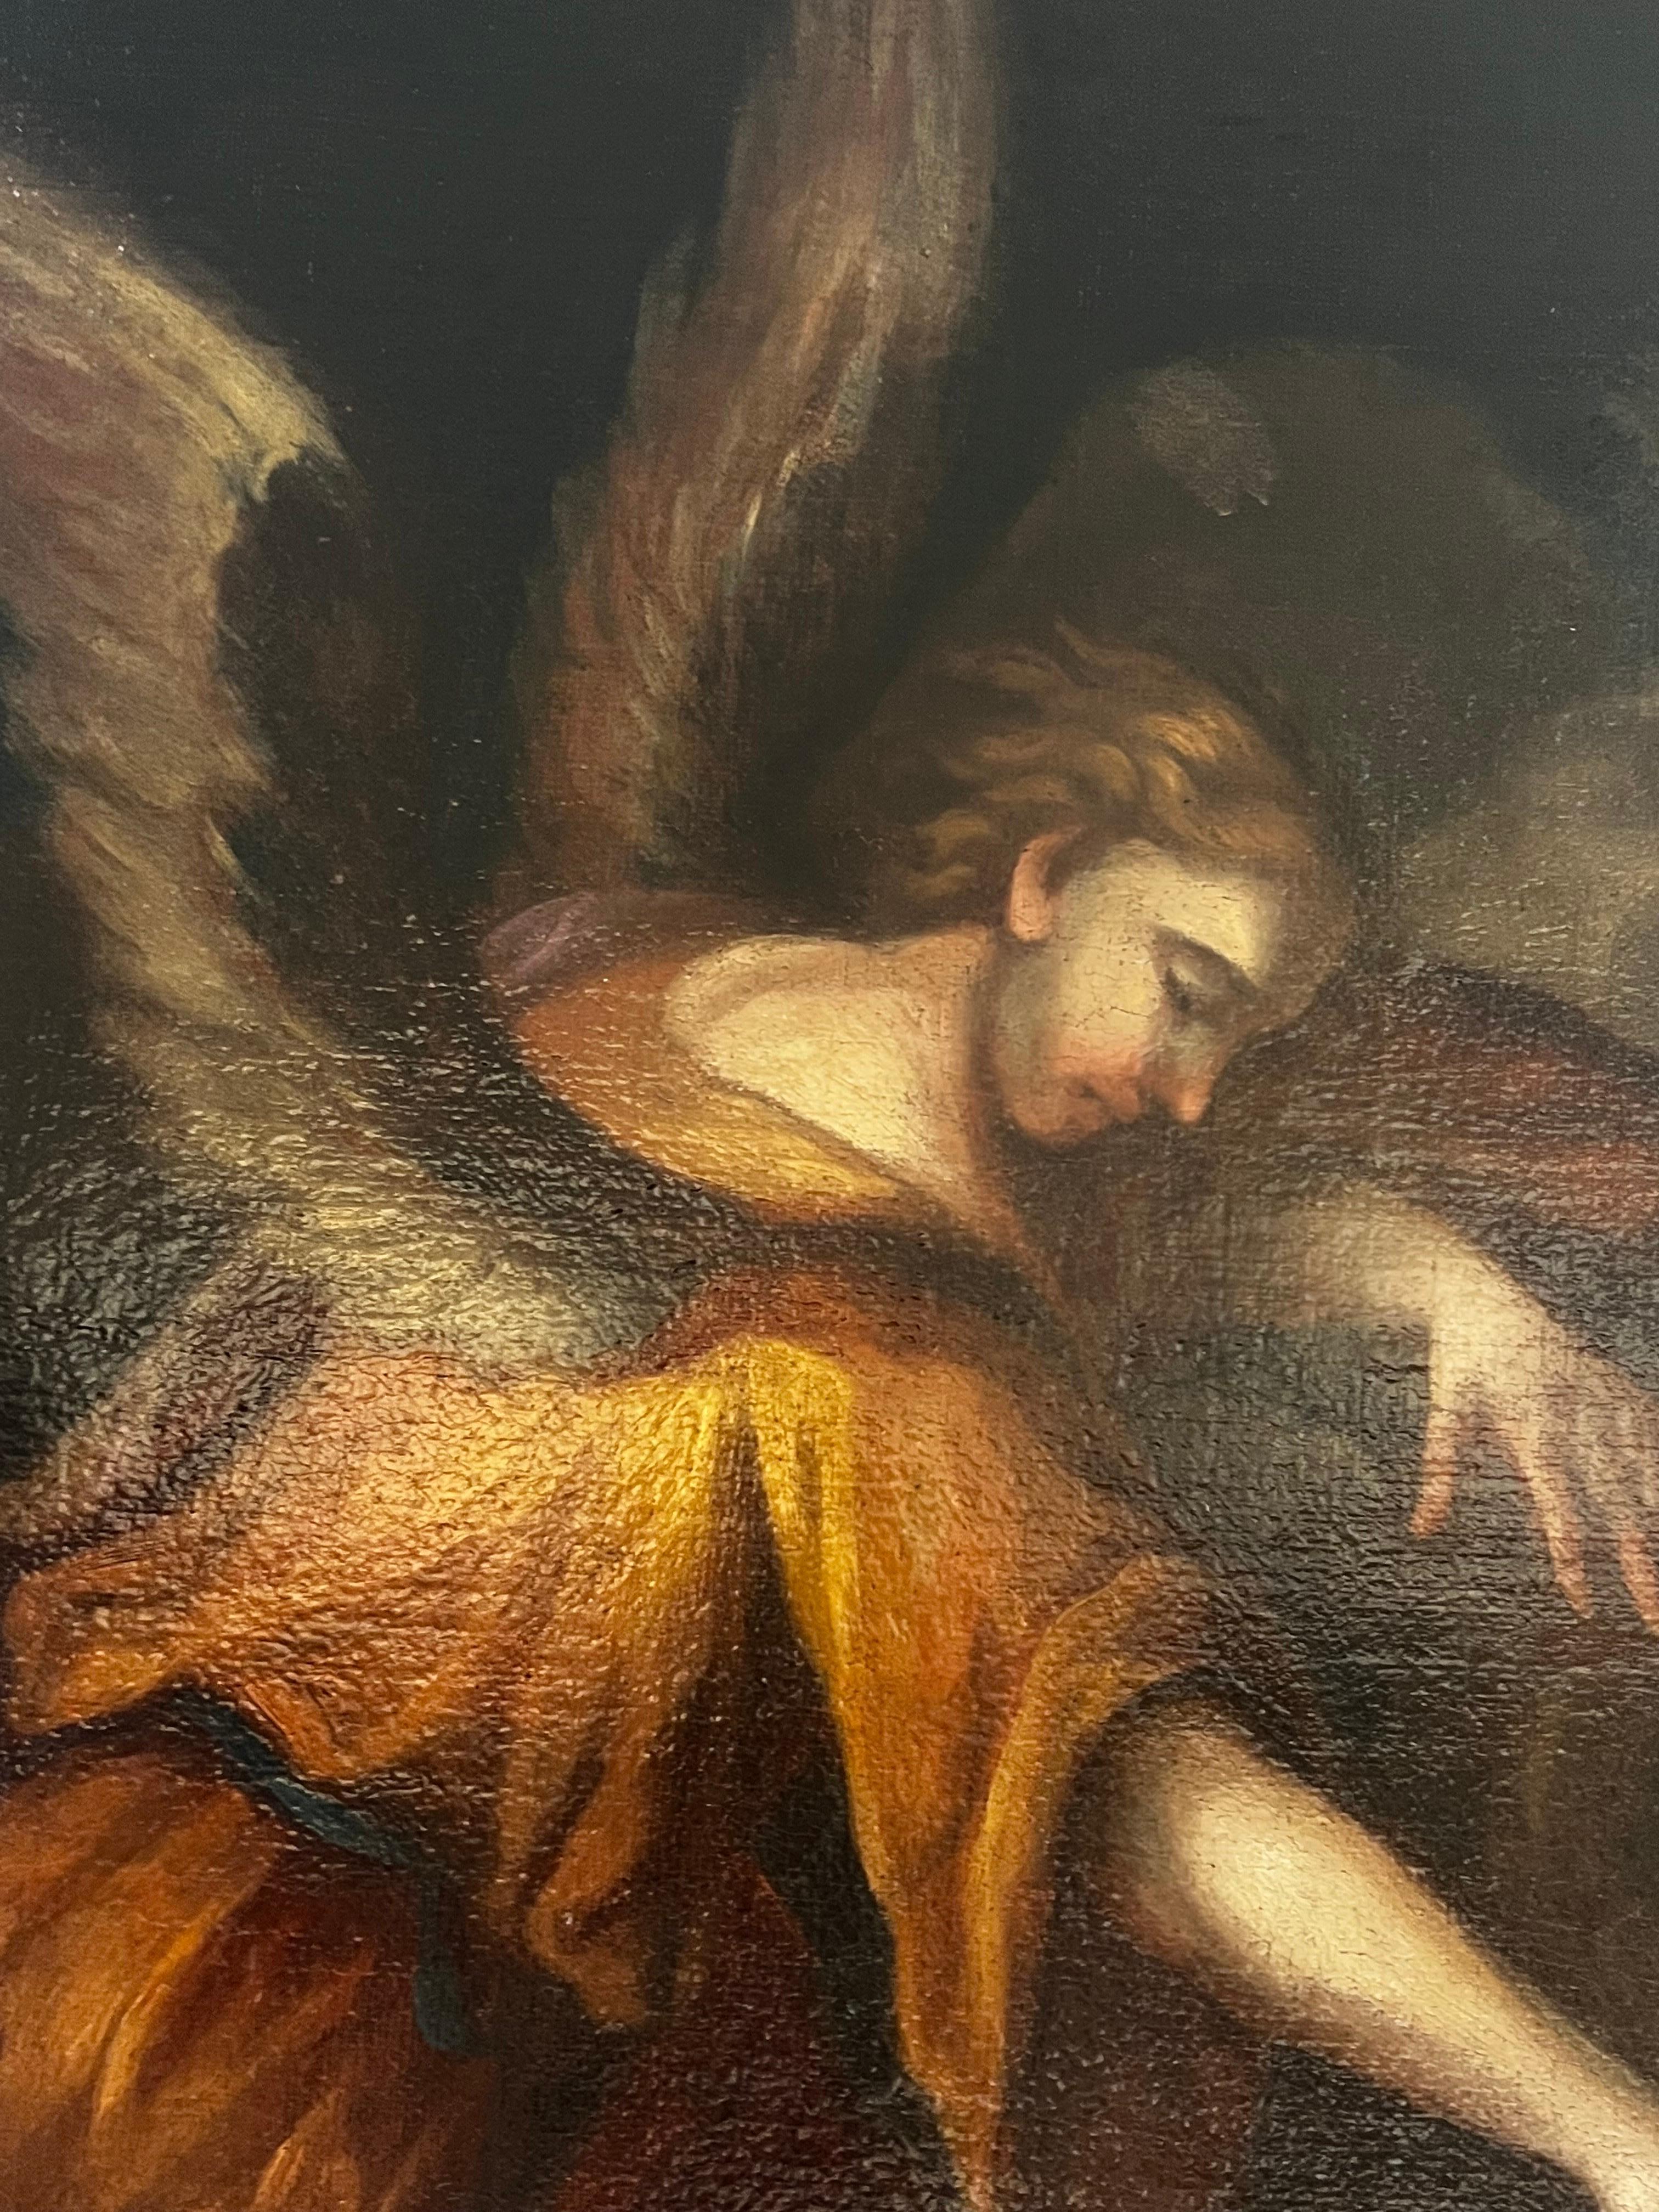 Artist/ School: Italian School, early 18th century

Title: Winged Angel in Flight over Night Sky. Beautifully painted, the work is thought most likely to be a fragment cut down from a once larger composition. 

Medium: oil on canvas, unframed